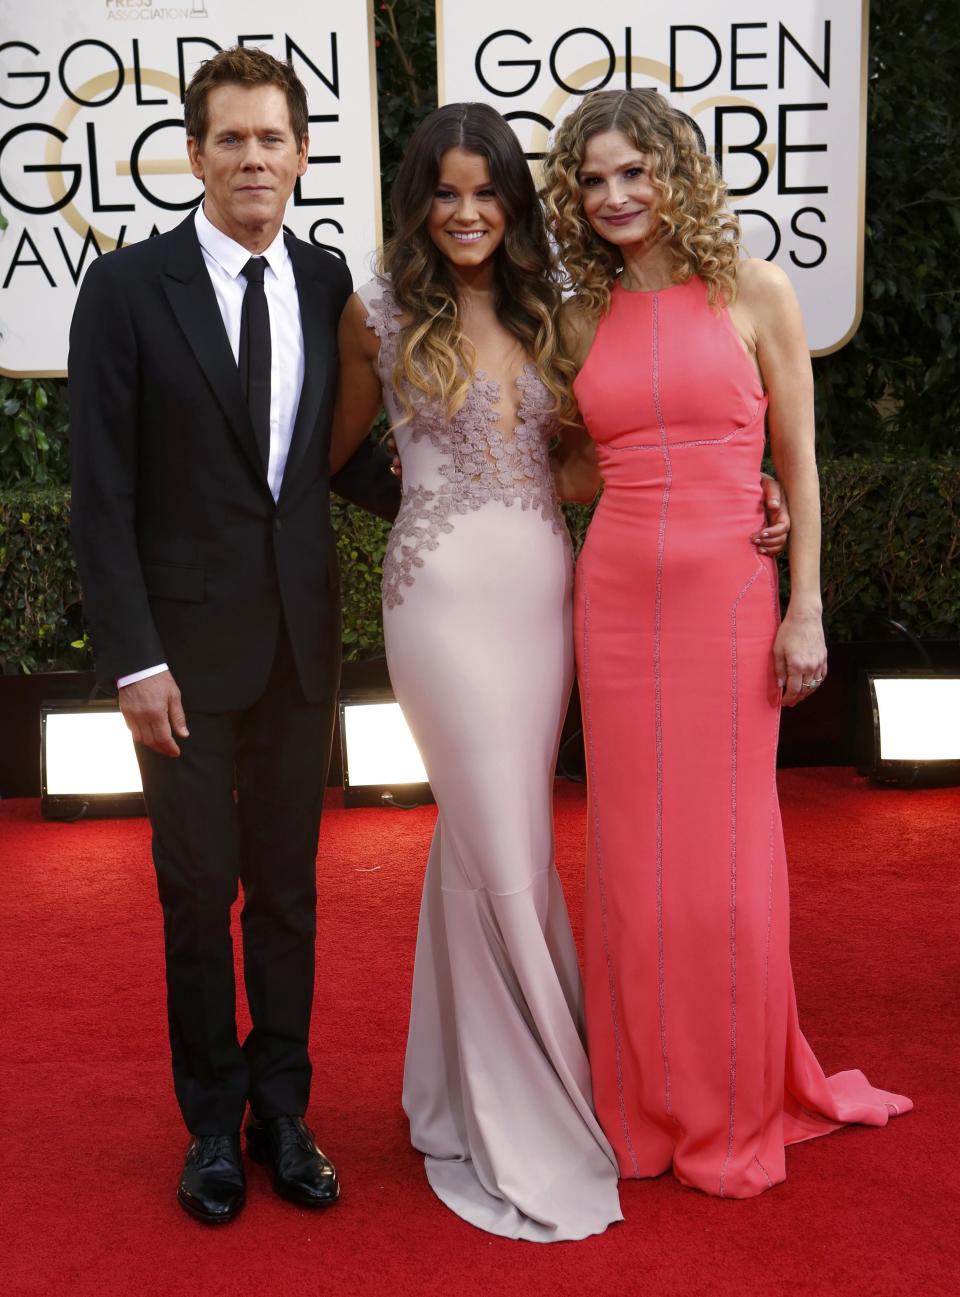 Actor Kevin Bacon with daughter Sosie Bacon and wife Kyra Sedgwick pose on arrival at the 71st annual Golden Globe Awards in Beverly Hills